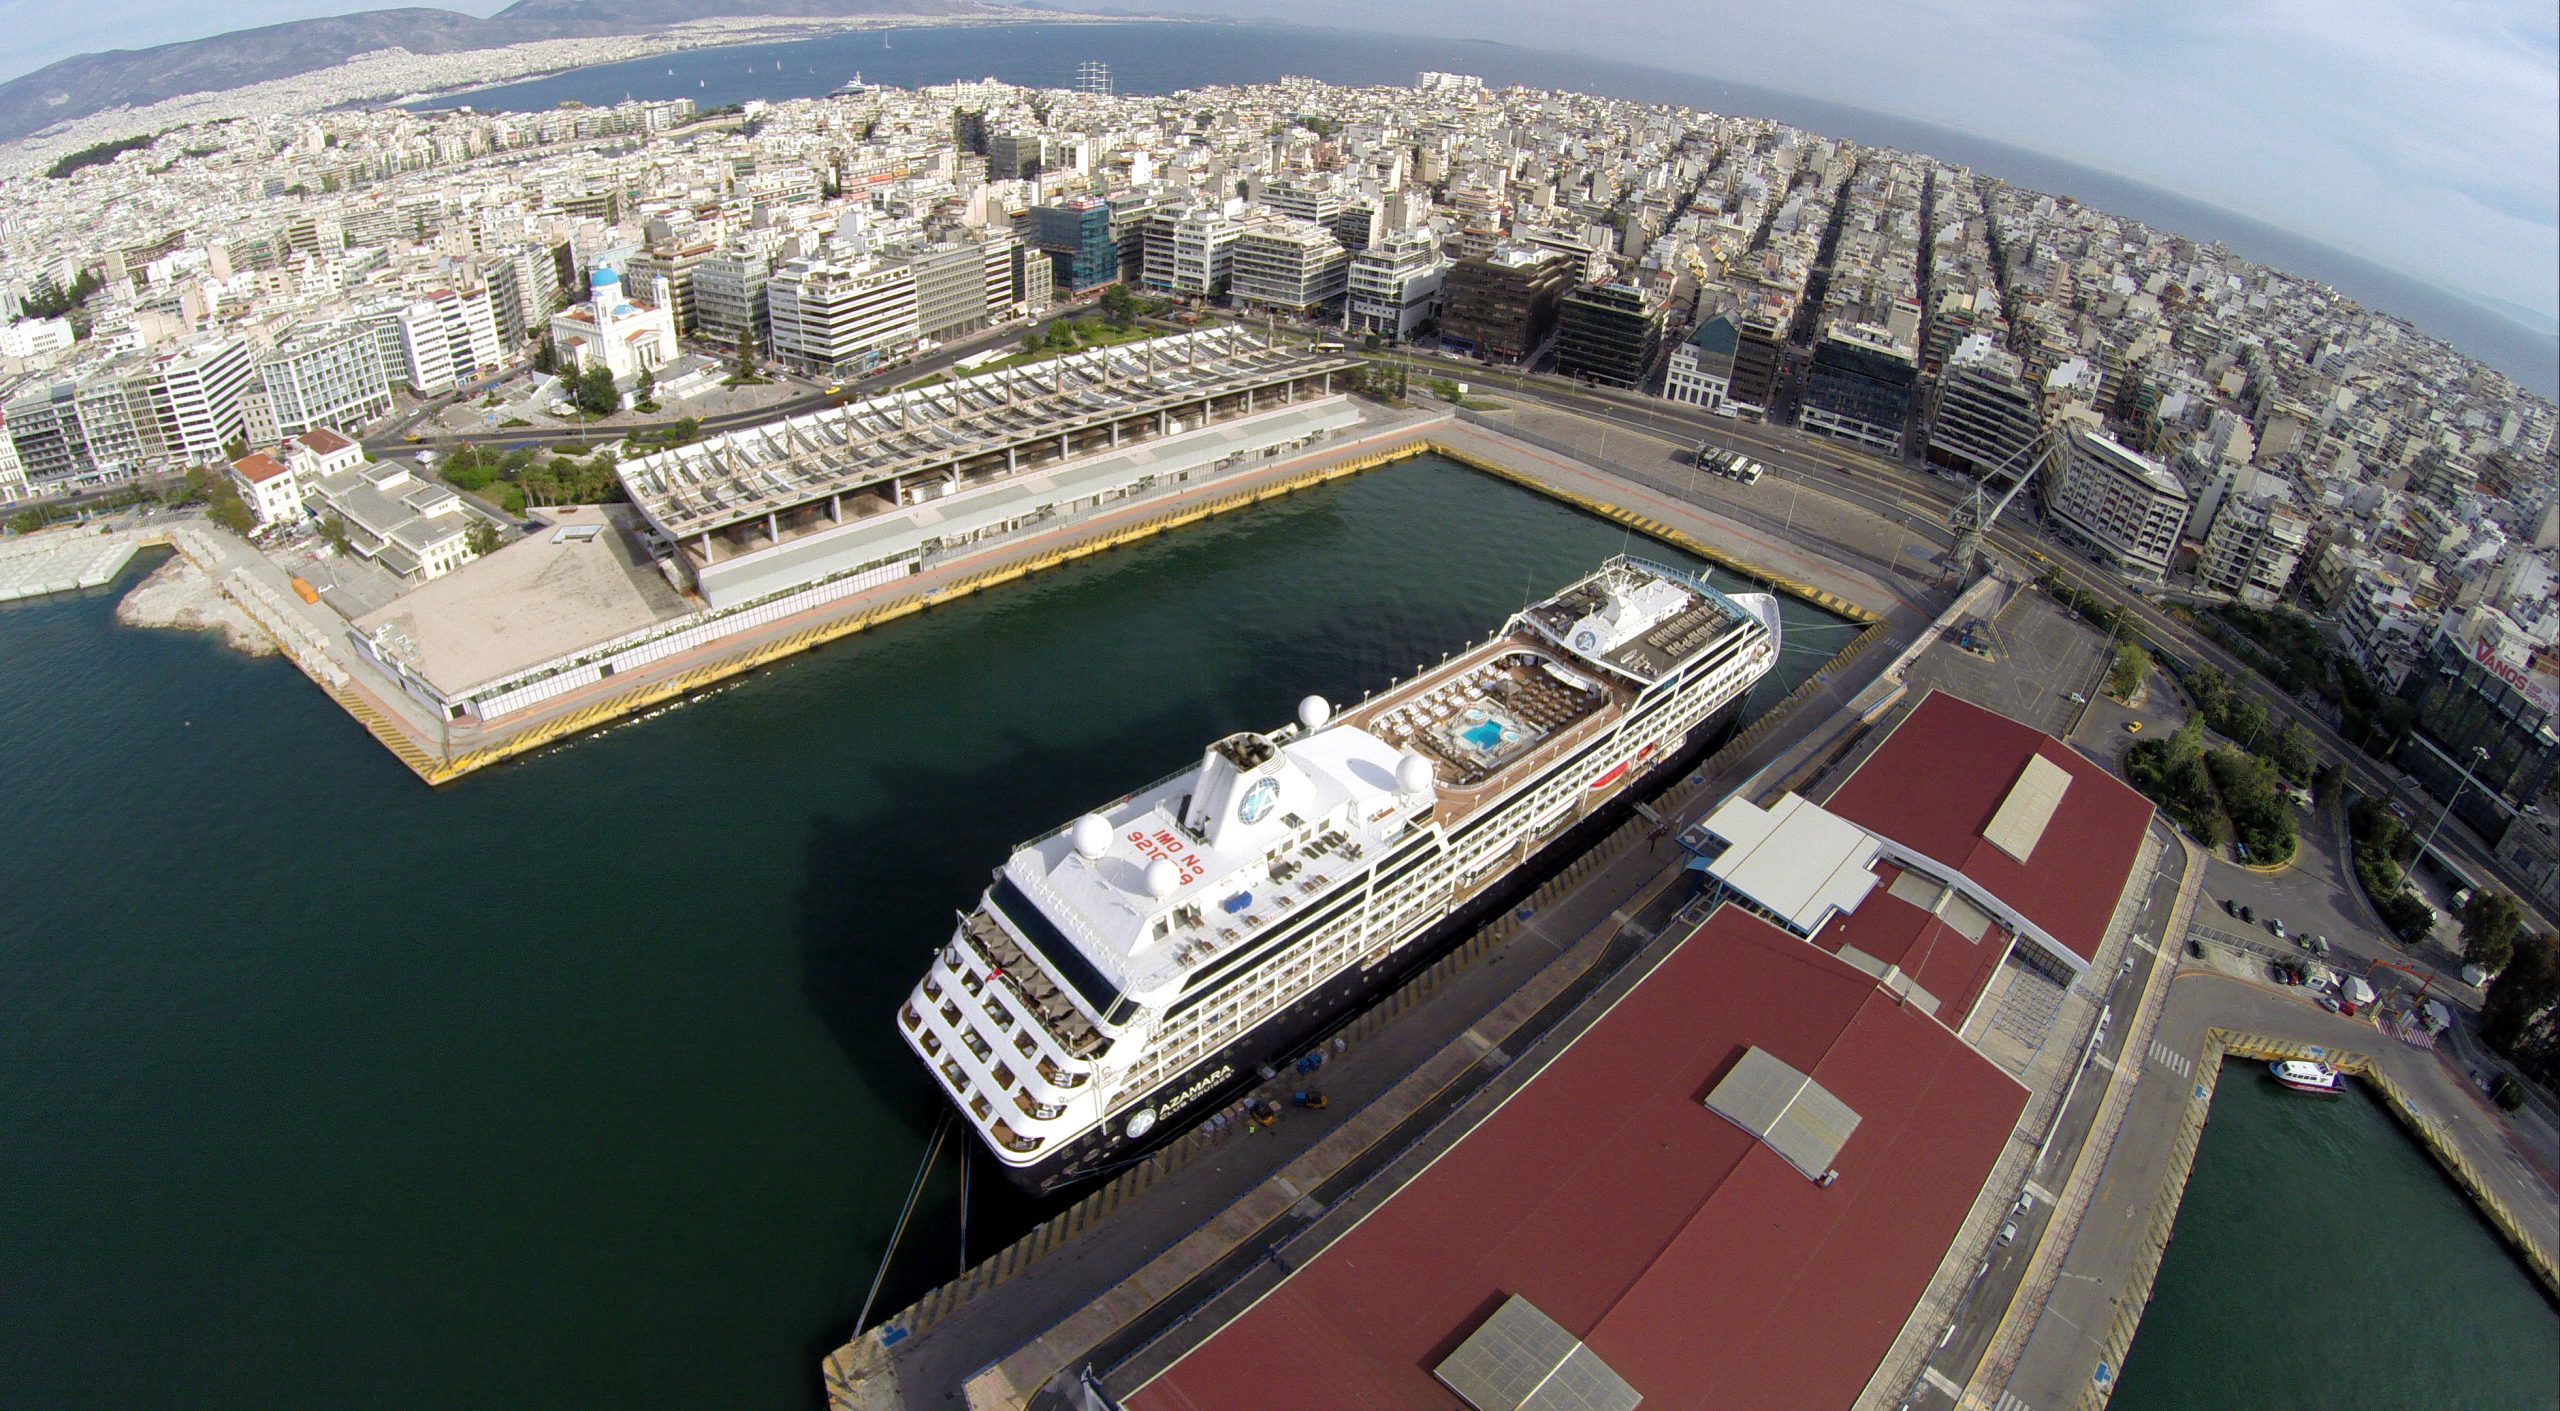 Port of Piraeus turnover recovers in H1 2021